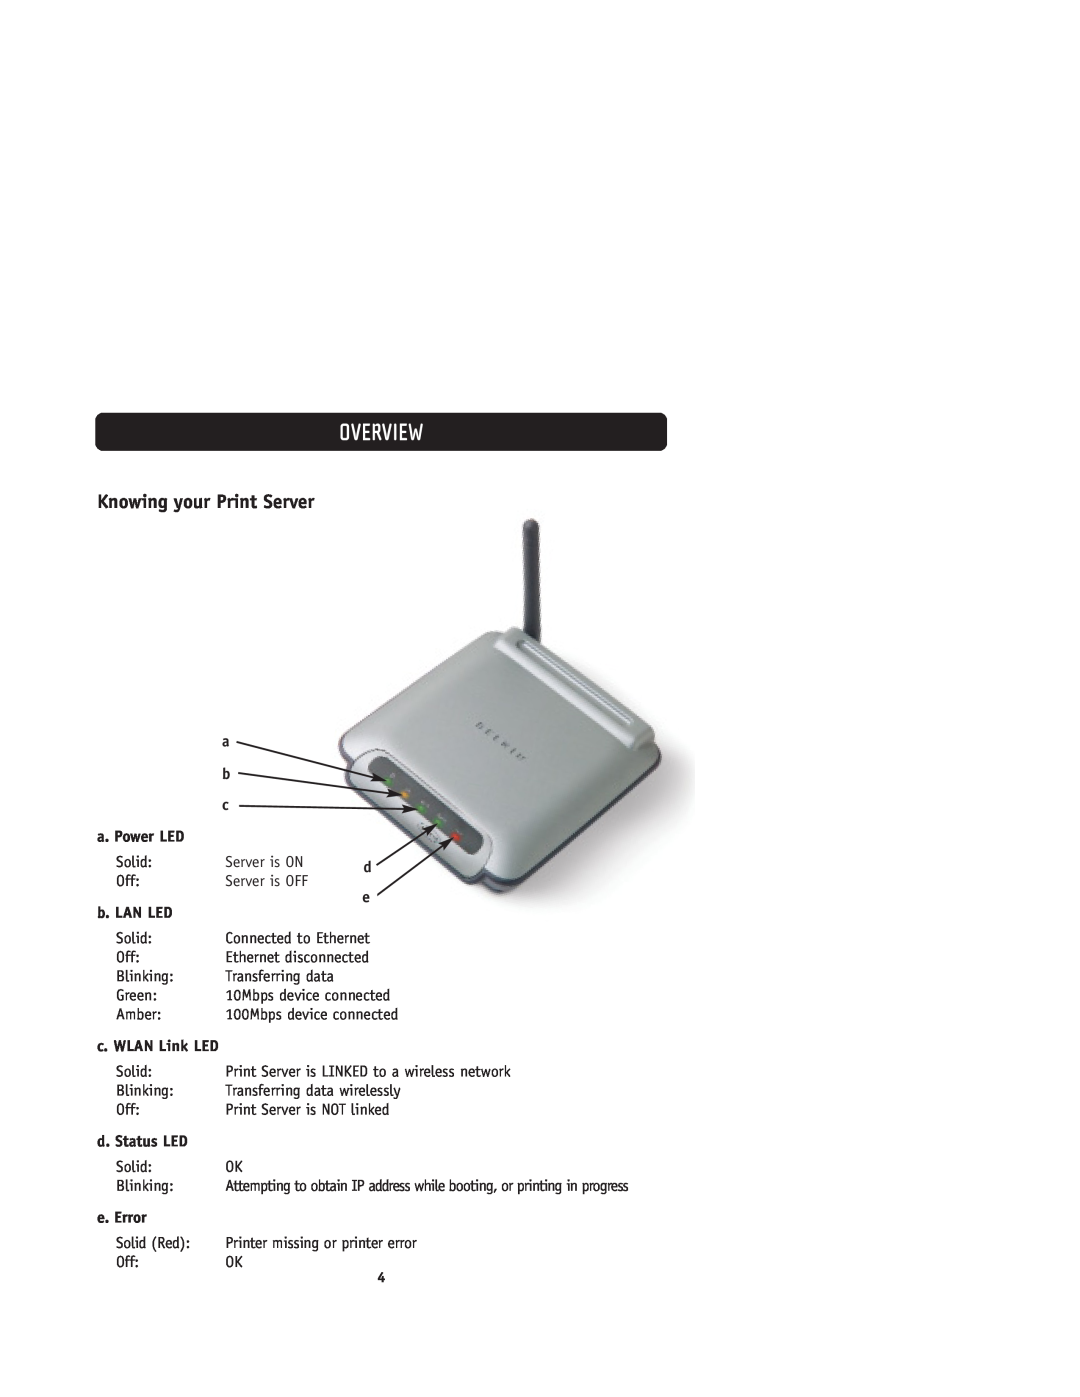 Belkin F1UP0001 user manual Knowing your Print Server, Overview, a. Power LED, b. LAN LED, d. Status LED, e. Error 